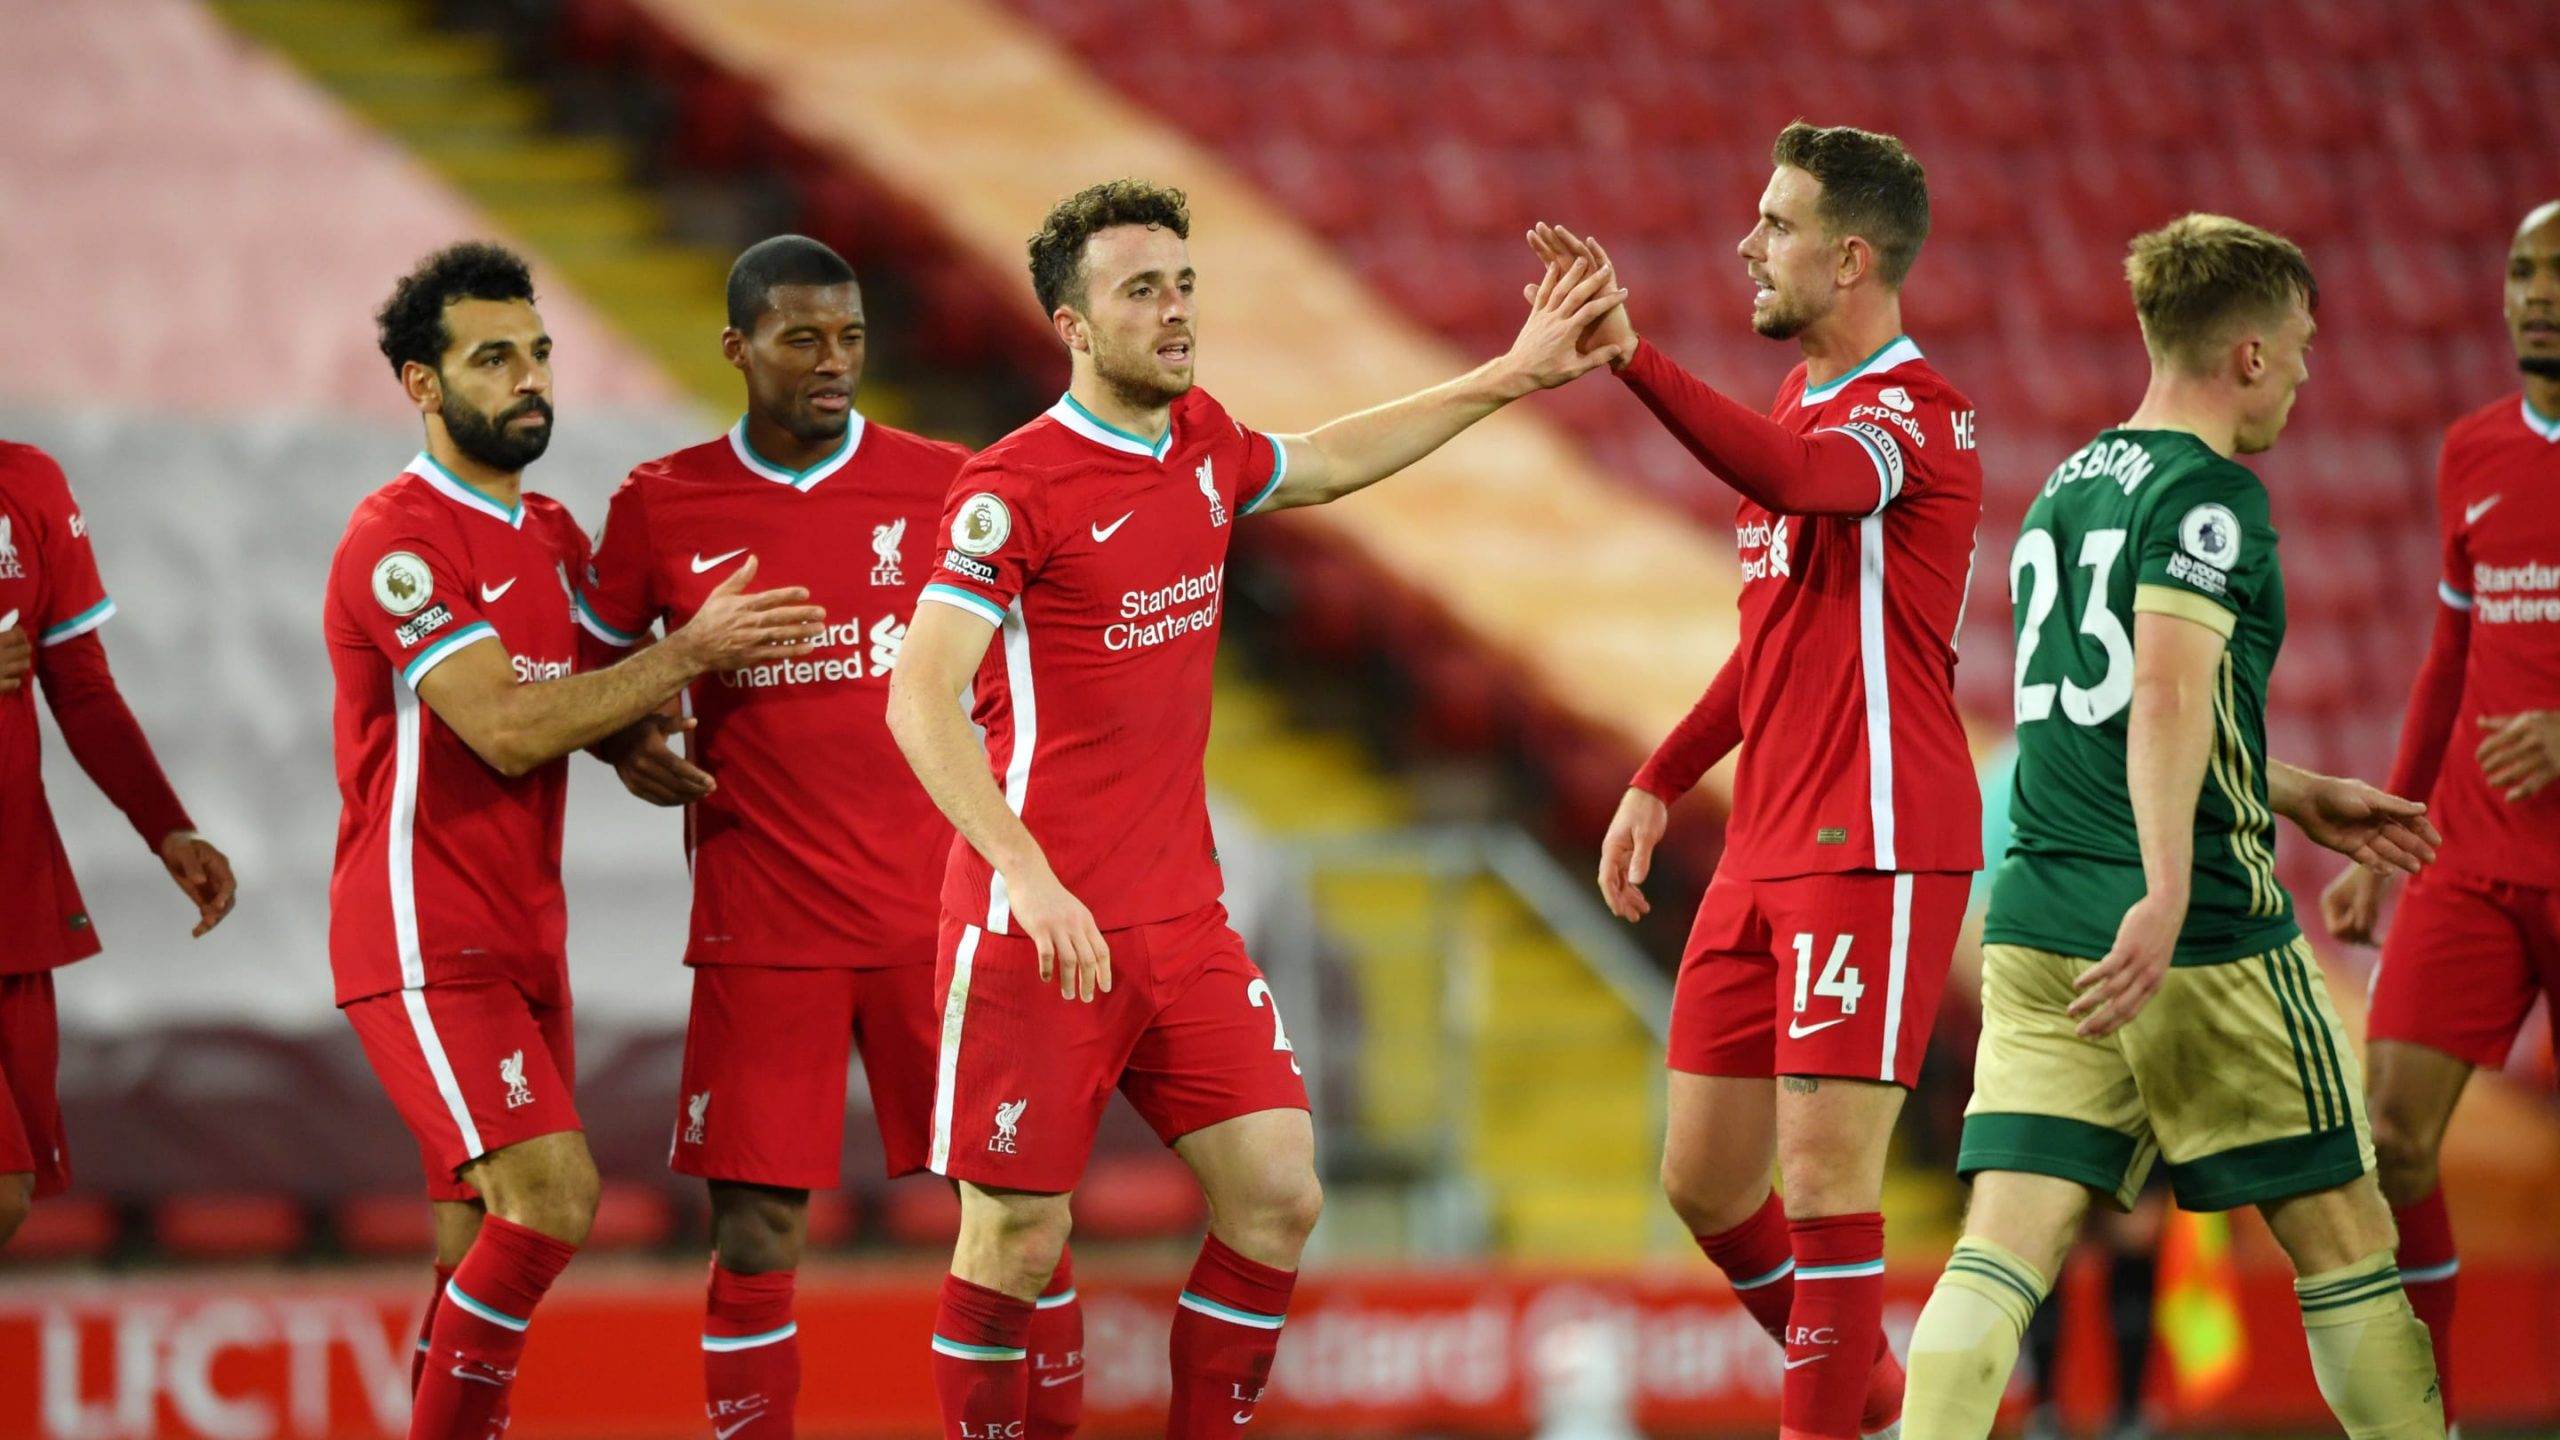  Liverpool's Jordan Henderson celebrates scoring his team's first goal with teammates Mohamed Salah, Sadio Mane and Roberto Firmino during the Premier League match between Liverpool and Sheffield United at Anfield on February 2, 2021.